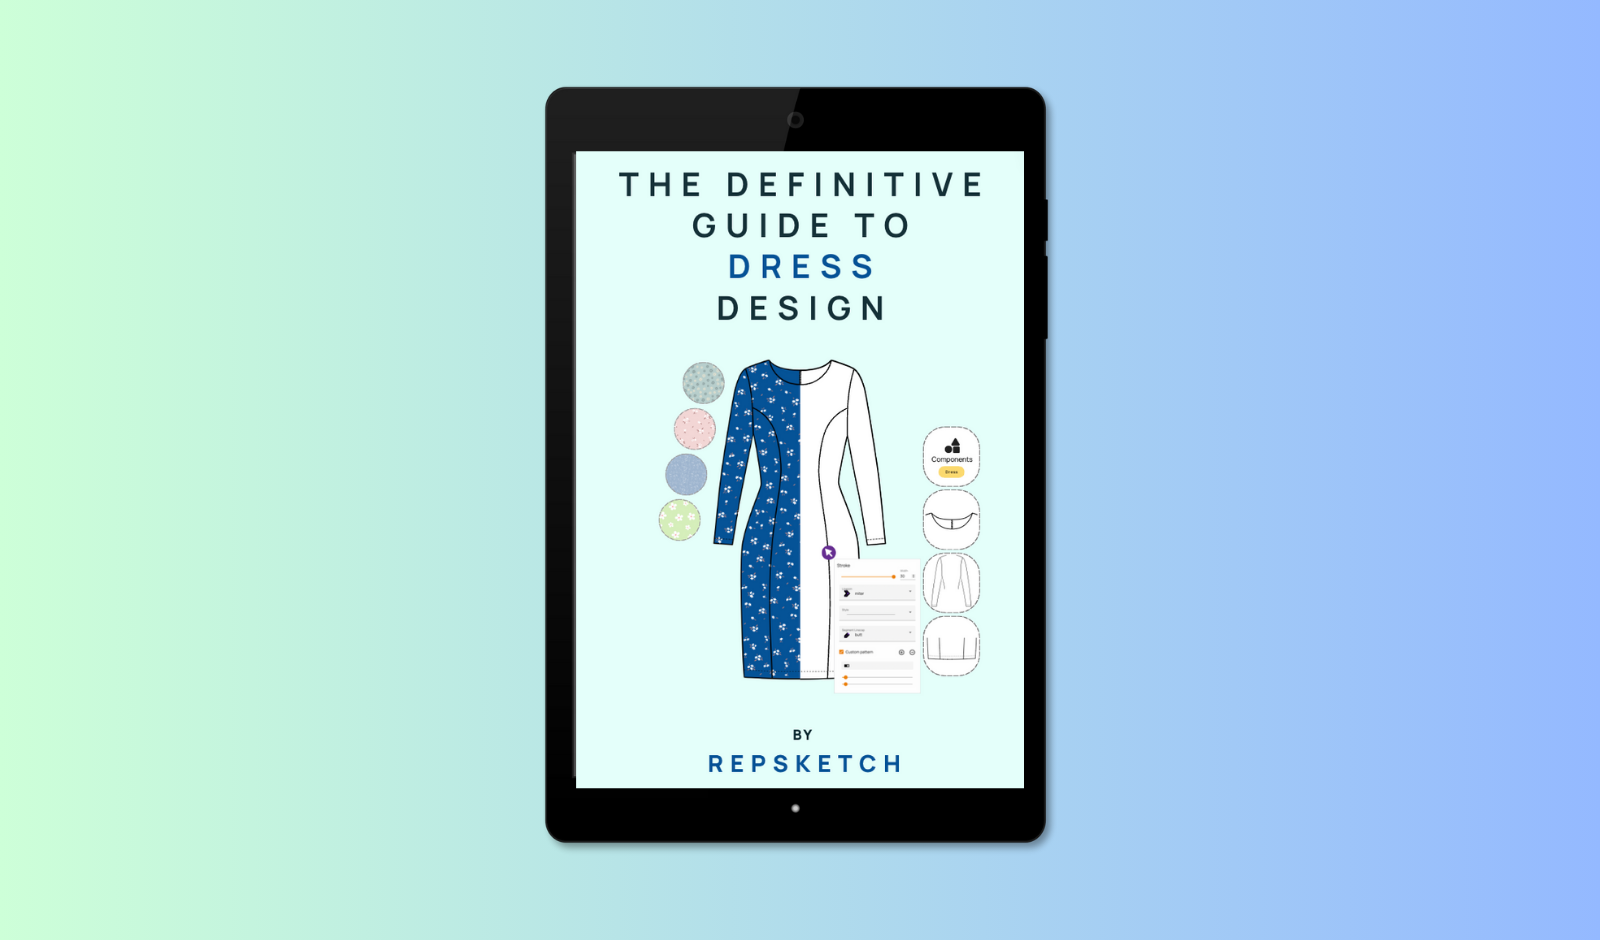 Ebook: The Definitive Guide to Dress Design